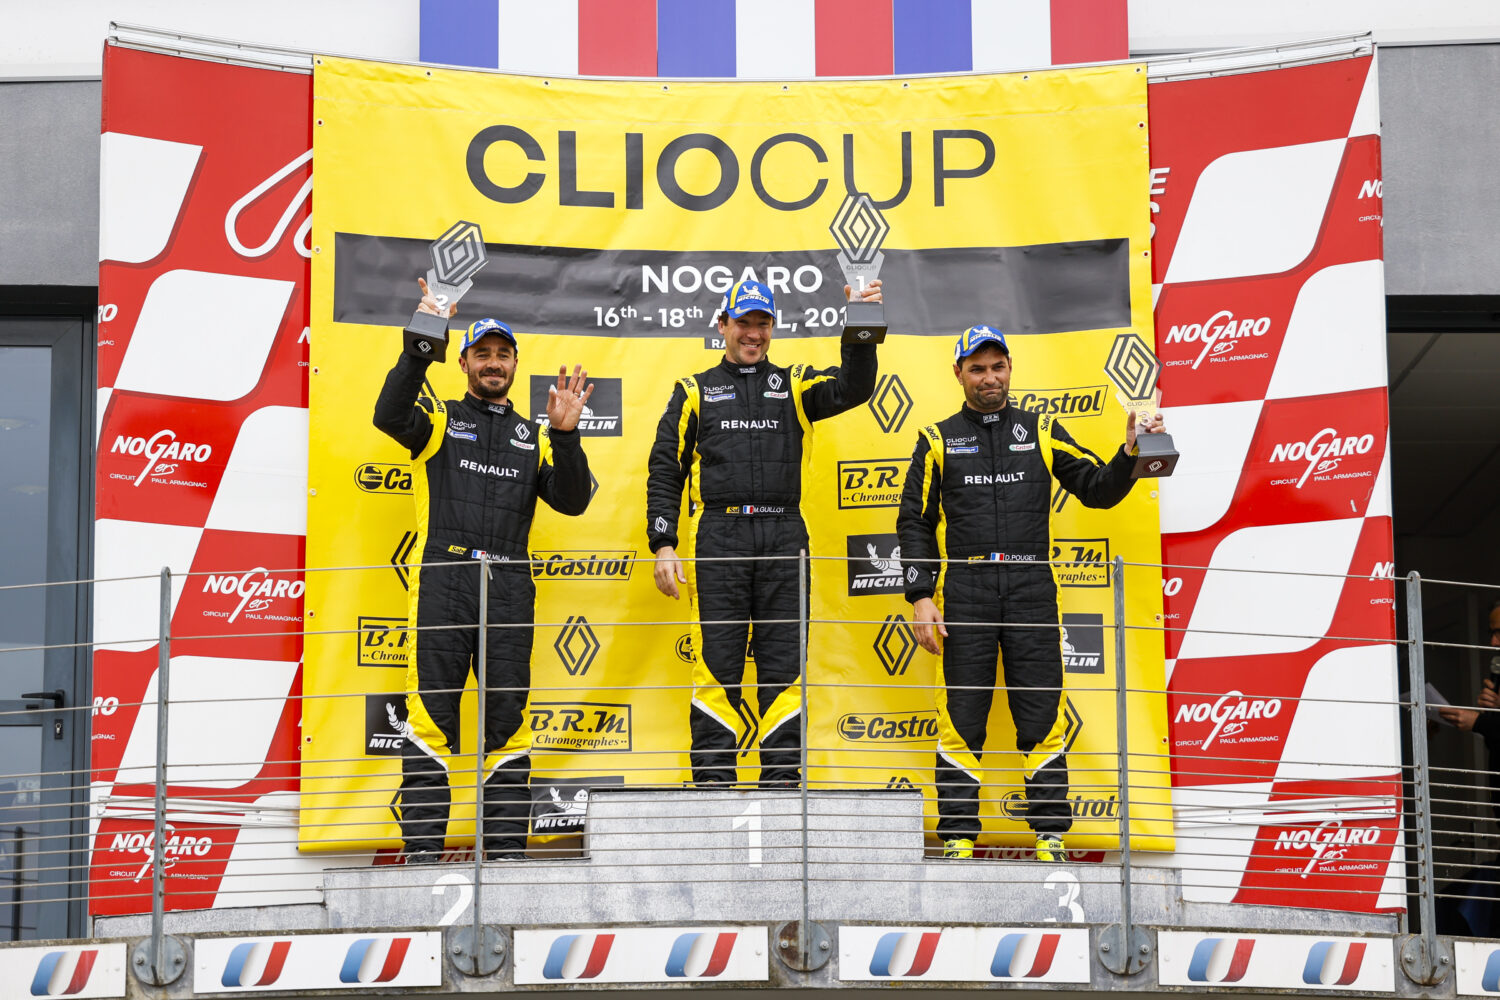 Marc Guillot wins, Nicolas Milan fills up on points